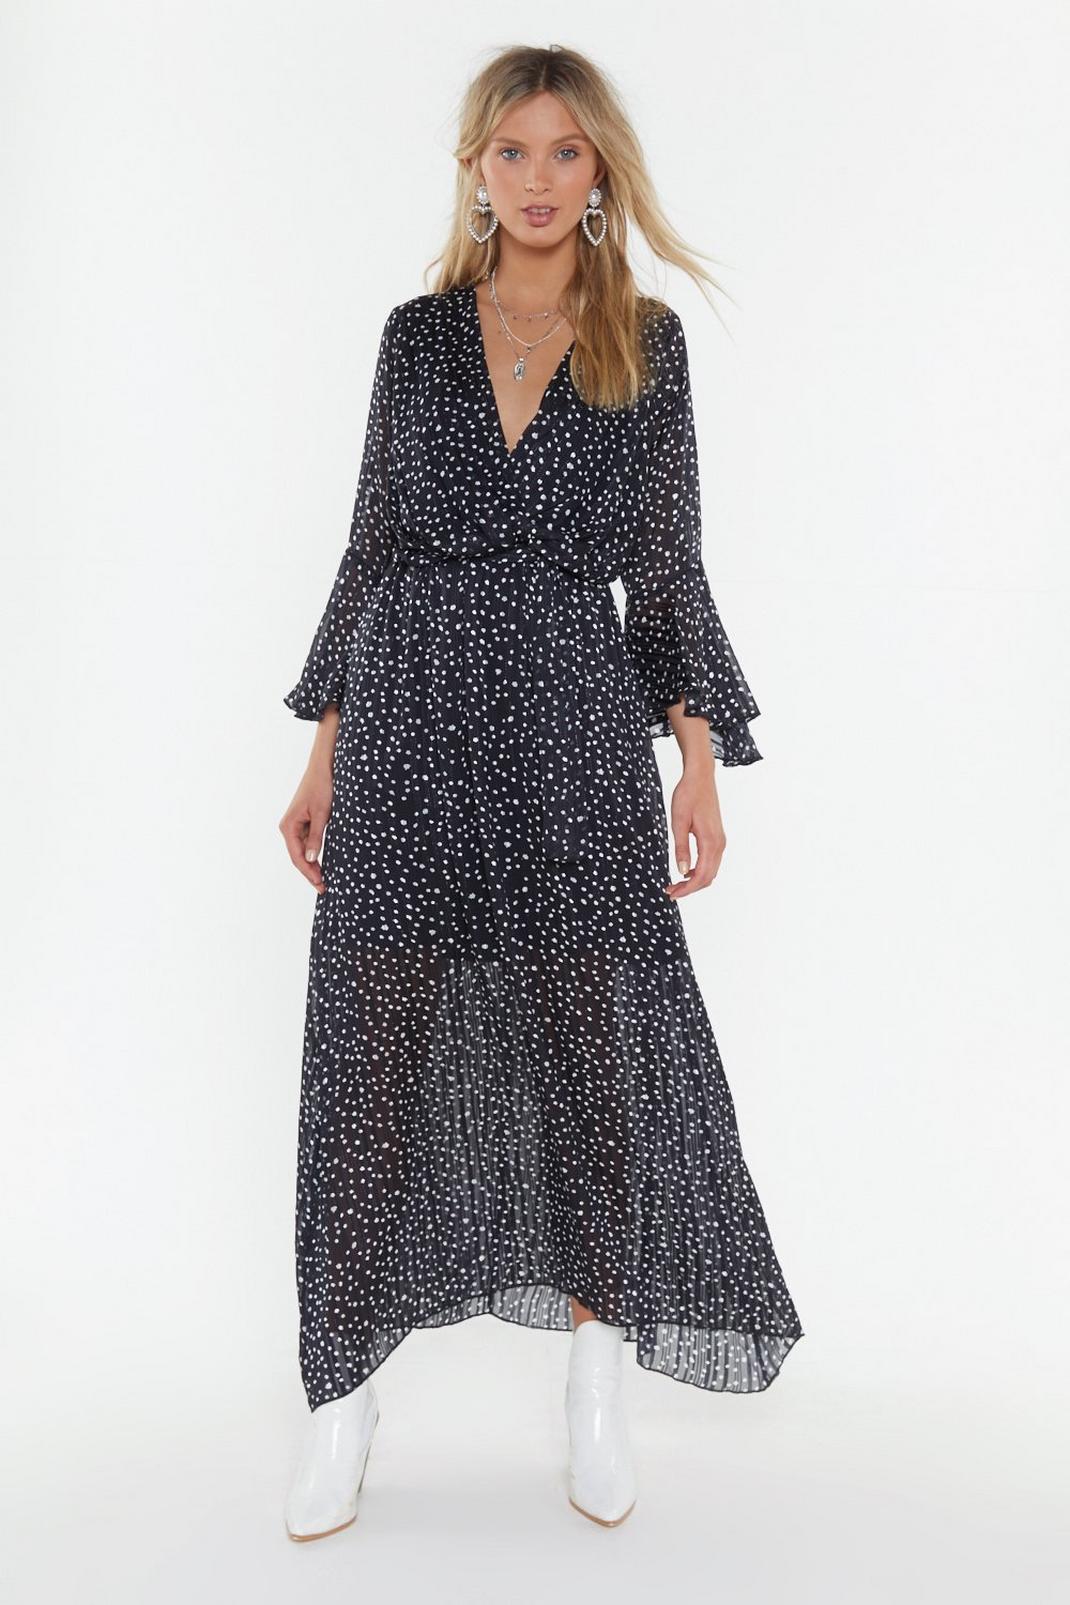 Dot Your Number Spotty Maxi Dress image number 1